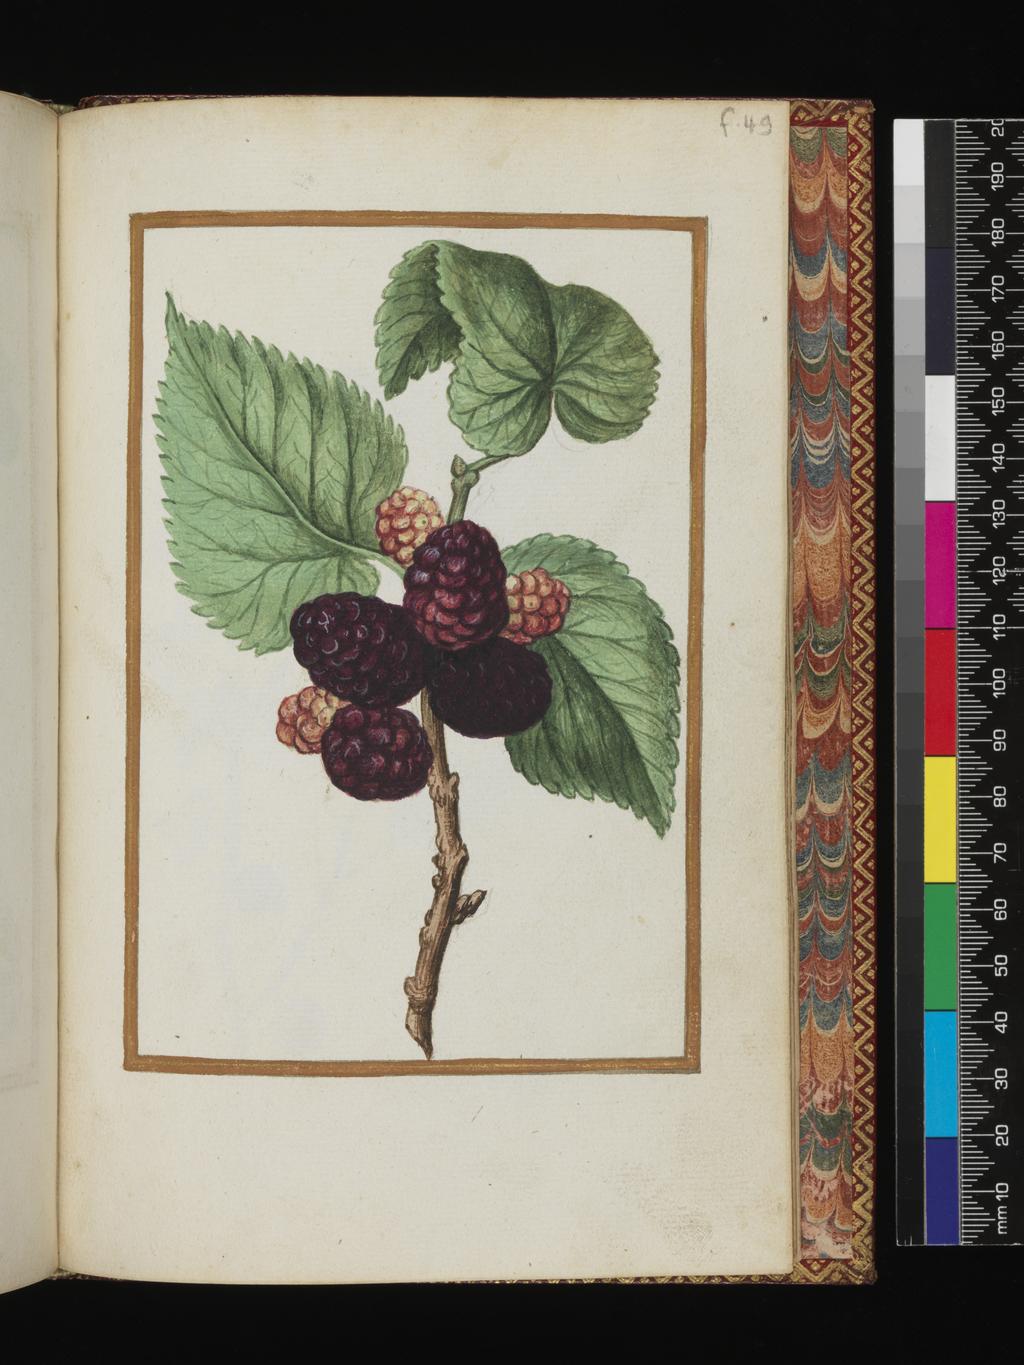 An image of Mulberry. Album containing a dedicatory sonnet and 48 drawings. Pinet, Antoine du (French, op. c. 1584). Each of the drawings is framed by a border of gold paint of varying size according to the depth of the painted area. The drawings on white laid paper, watermarked with a bunch of grapes are bound into an album with a contemporary gold-tooled limp vellum cover bearing the arms, recto and verso of Louise of Lorraine (1553-1601). This, in turn, is bound into an eighteenth century French red morocco gilt binding. The spine is lettered in gold (see 'inscriptions/marks'). Each of the drawings is framed by a border of gold paint of varying size according to the depth of the painted area. Blank ff not detailed elsewhere. Height, sheet size, 204 mm, width, sheet size, 139 mm.